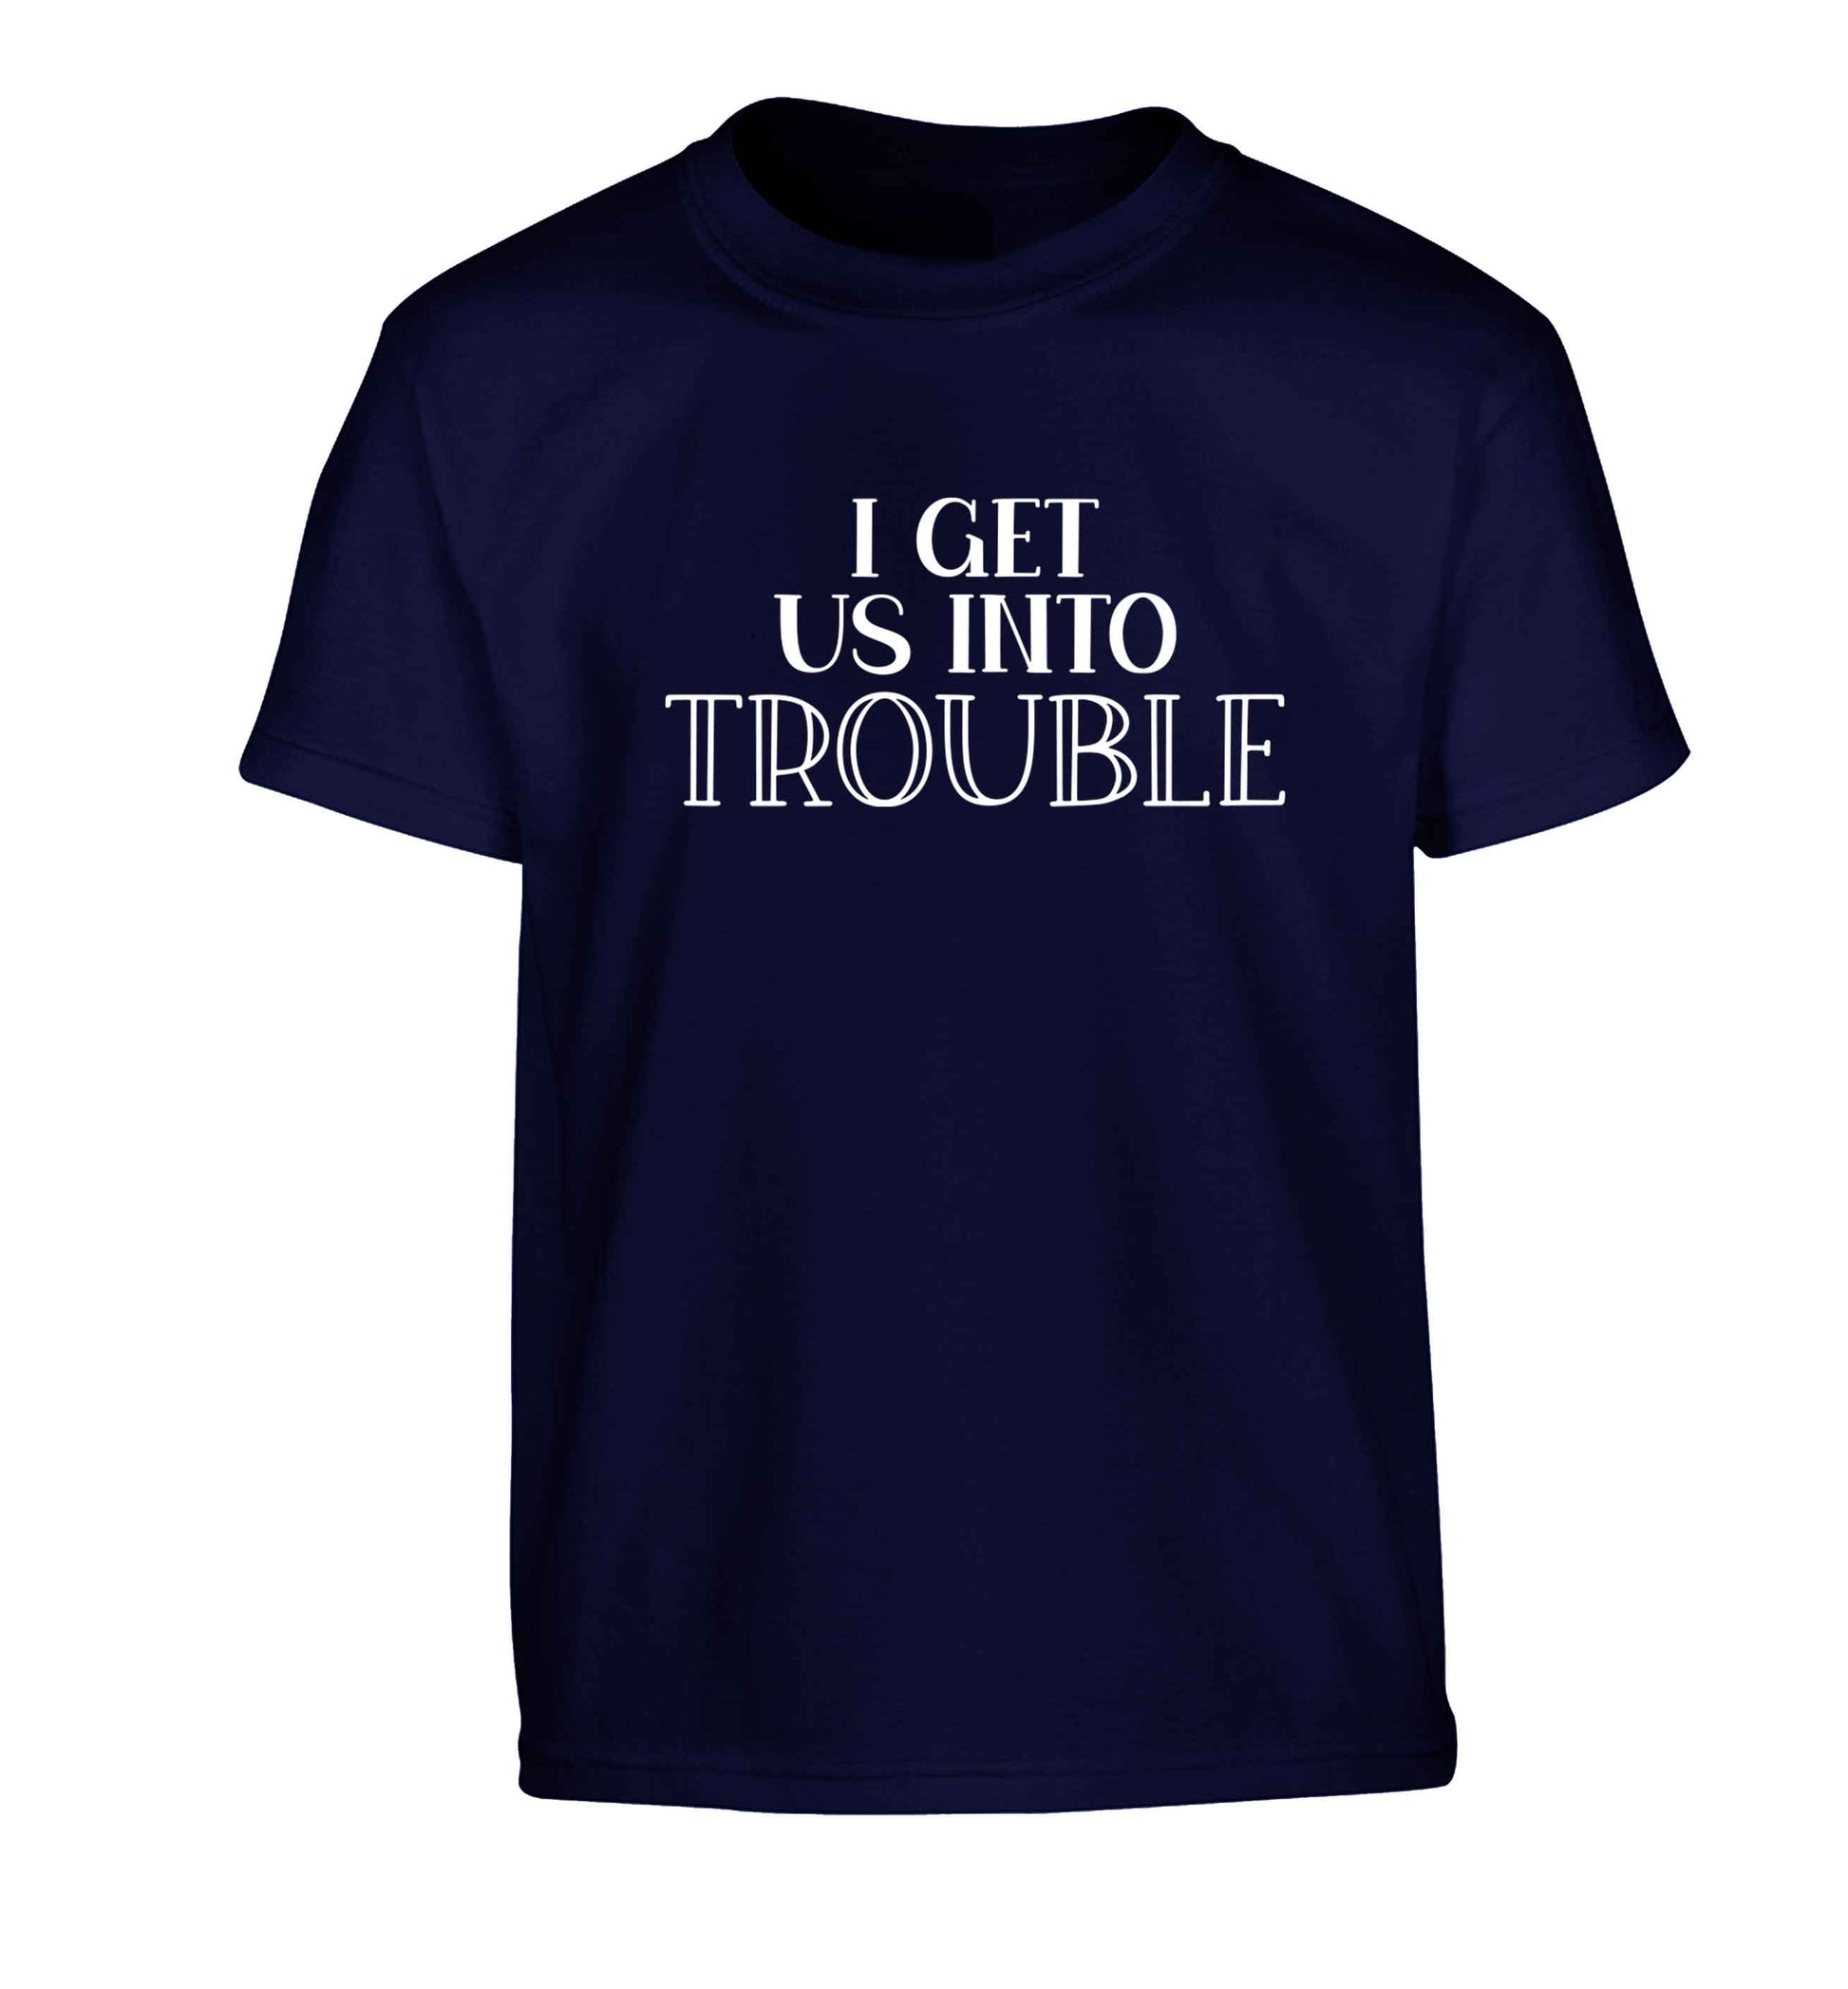 I get us into trouble Children's navy Tshirt 12-13 Years